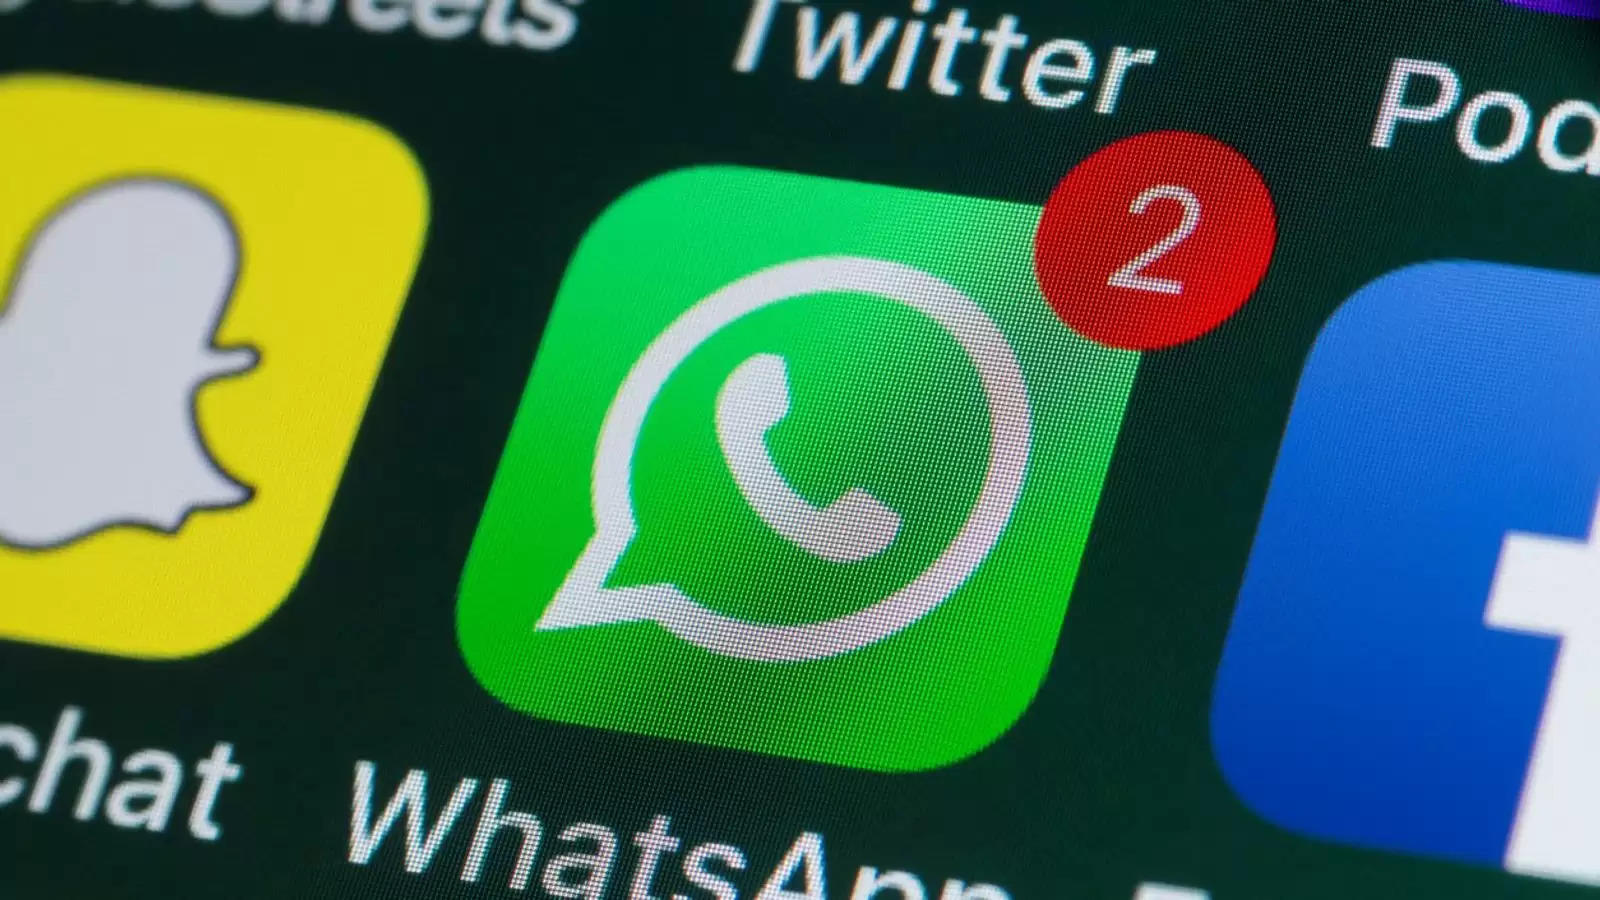 After an hour-long breakdown, WhatsApp services have partially been restored.